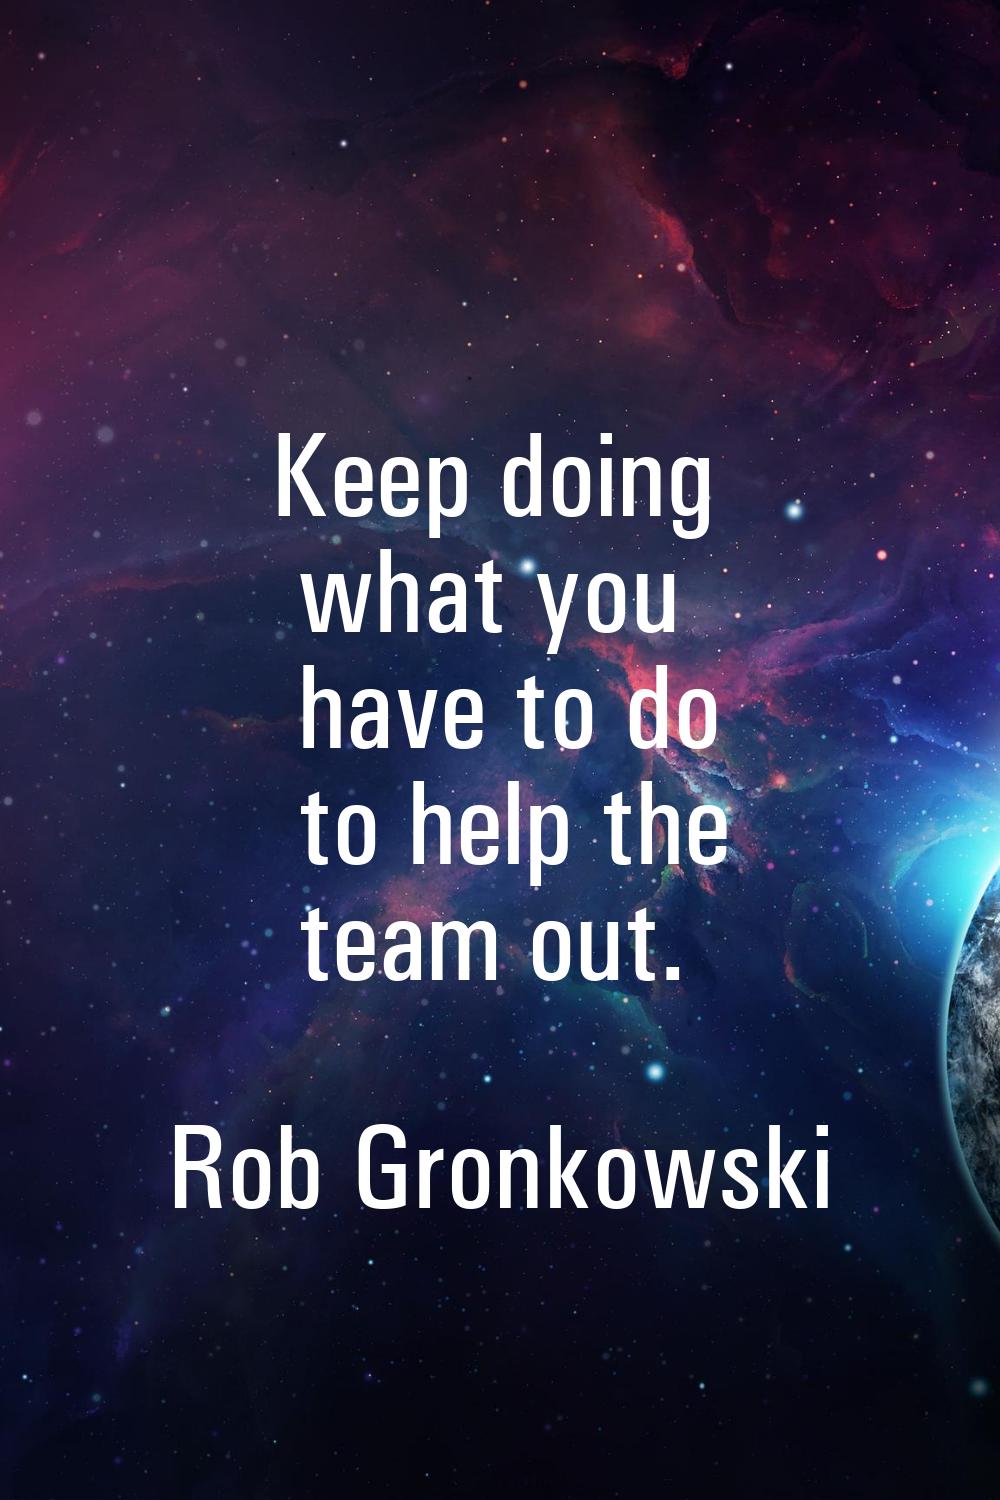 Keep doing what you have to do to help the team out.